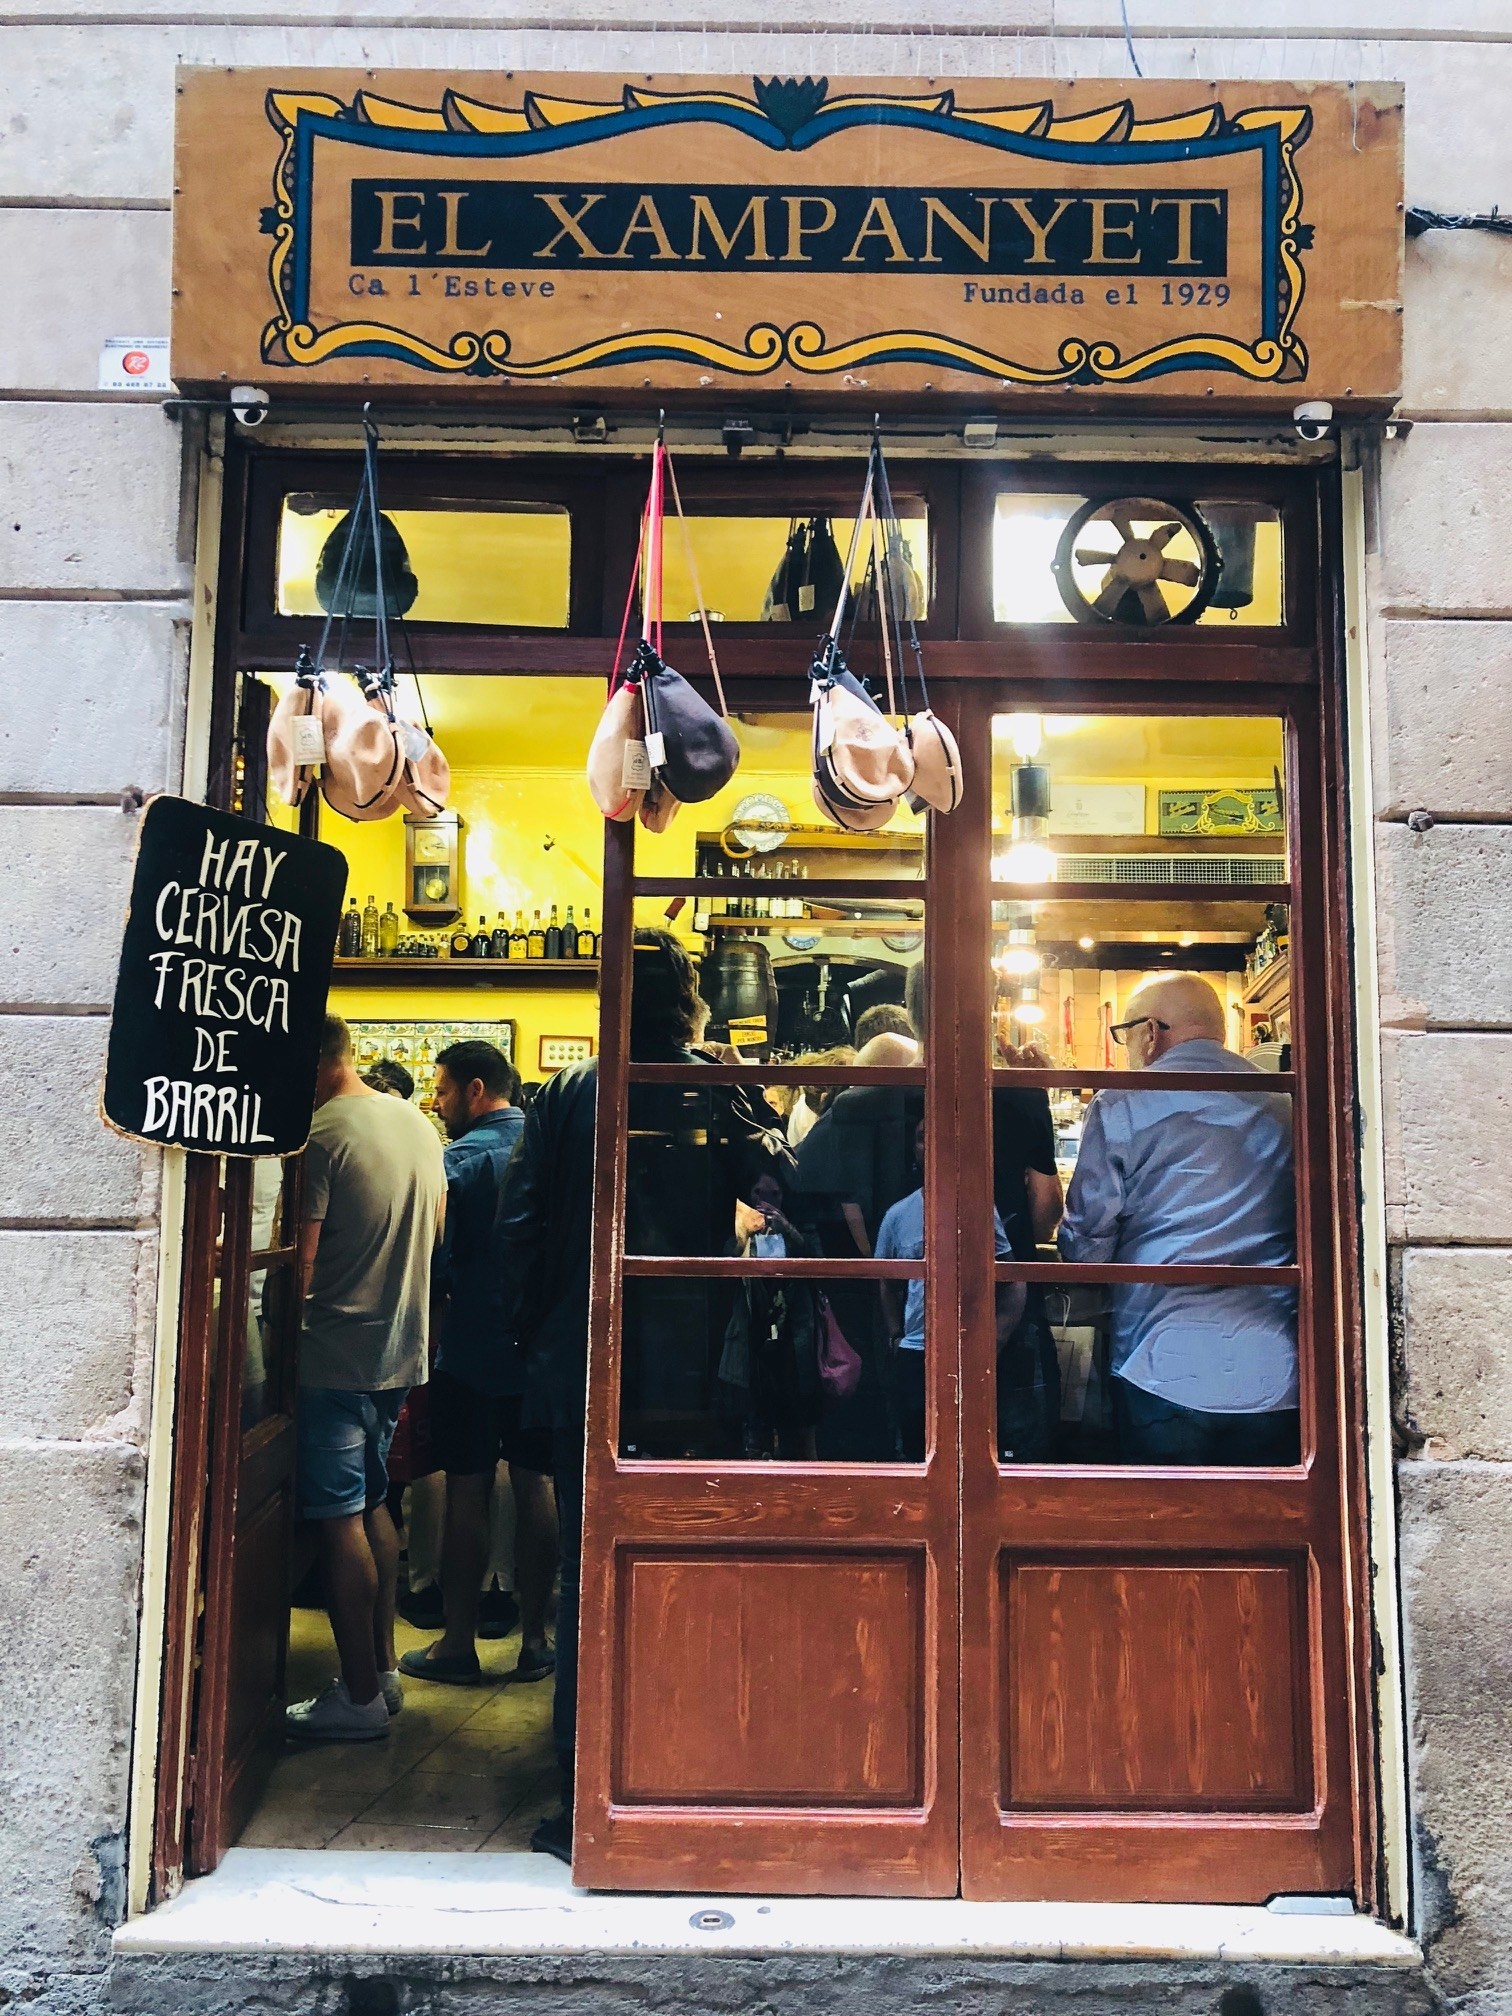 The entrance to a tapas restaurant in Spain